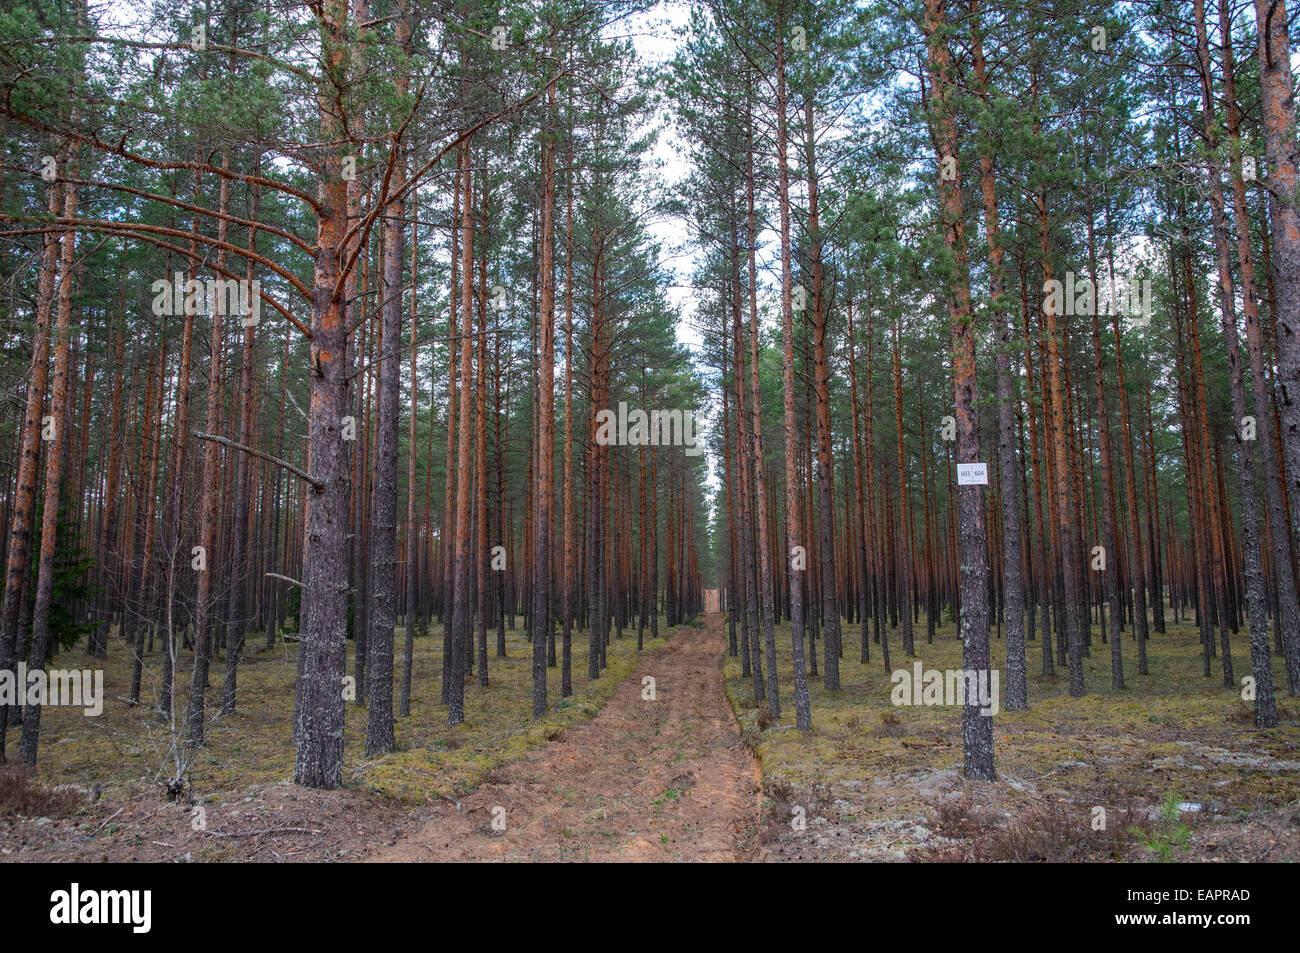 Dry stand of pine trees Stock Photo